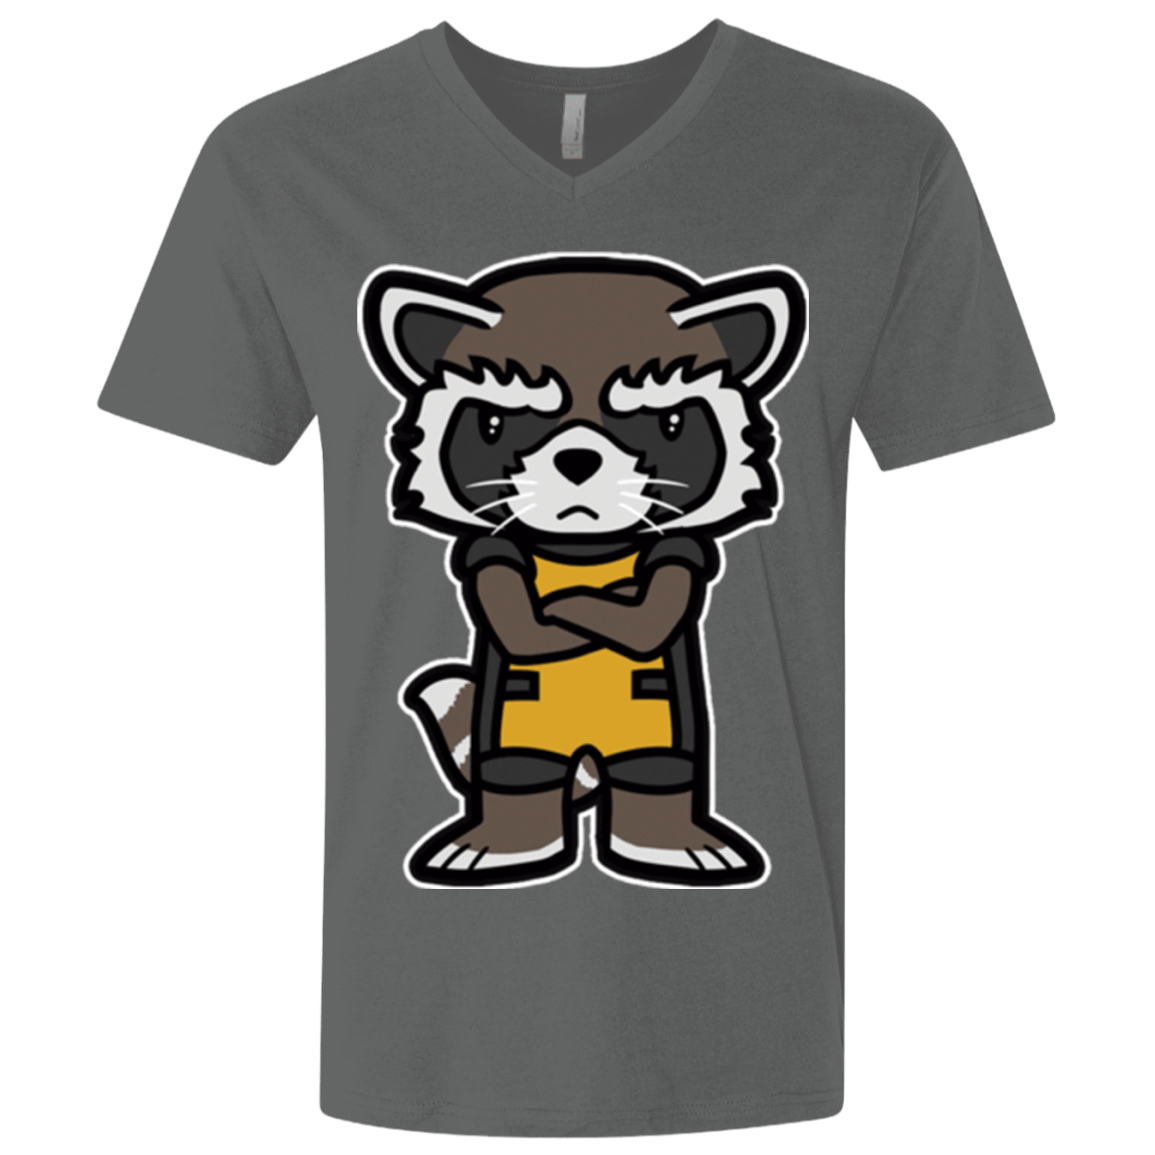 T-Shirts Heavy Metal / X-Small Angry Racoon Men's Premium V-Neck